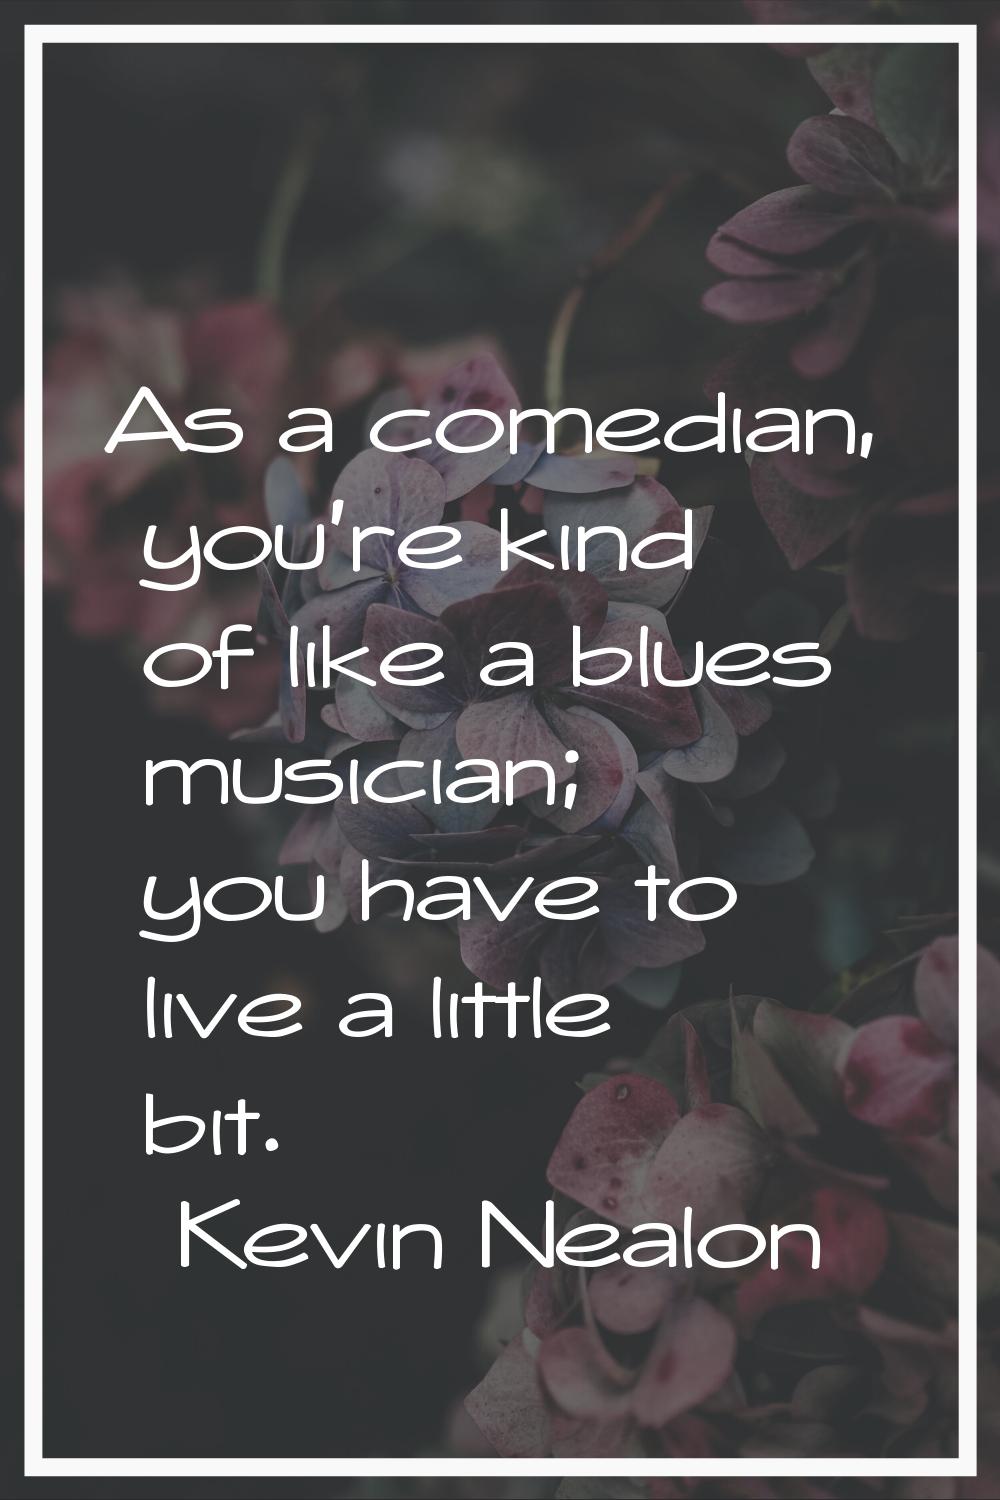 As a comedian, you're kind of like a blues musician; you have to live a little bit.